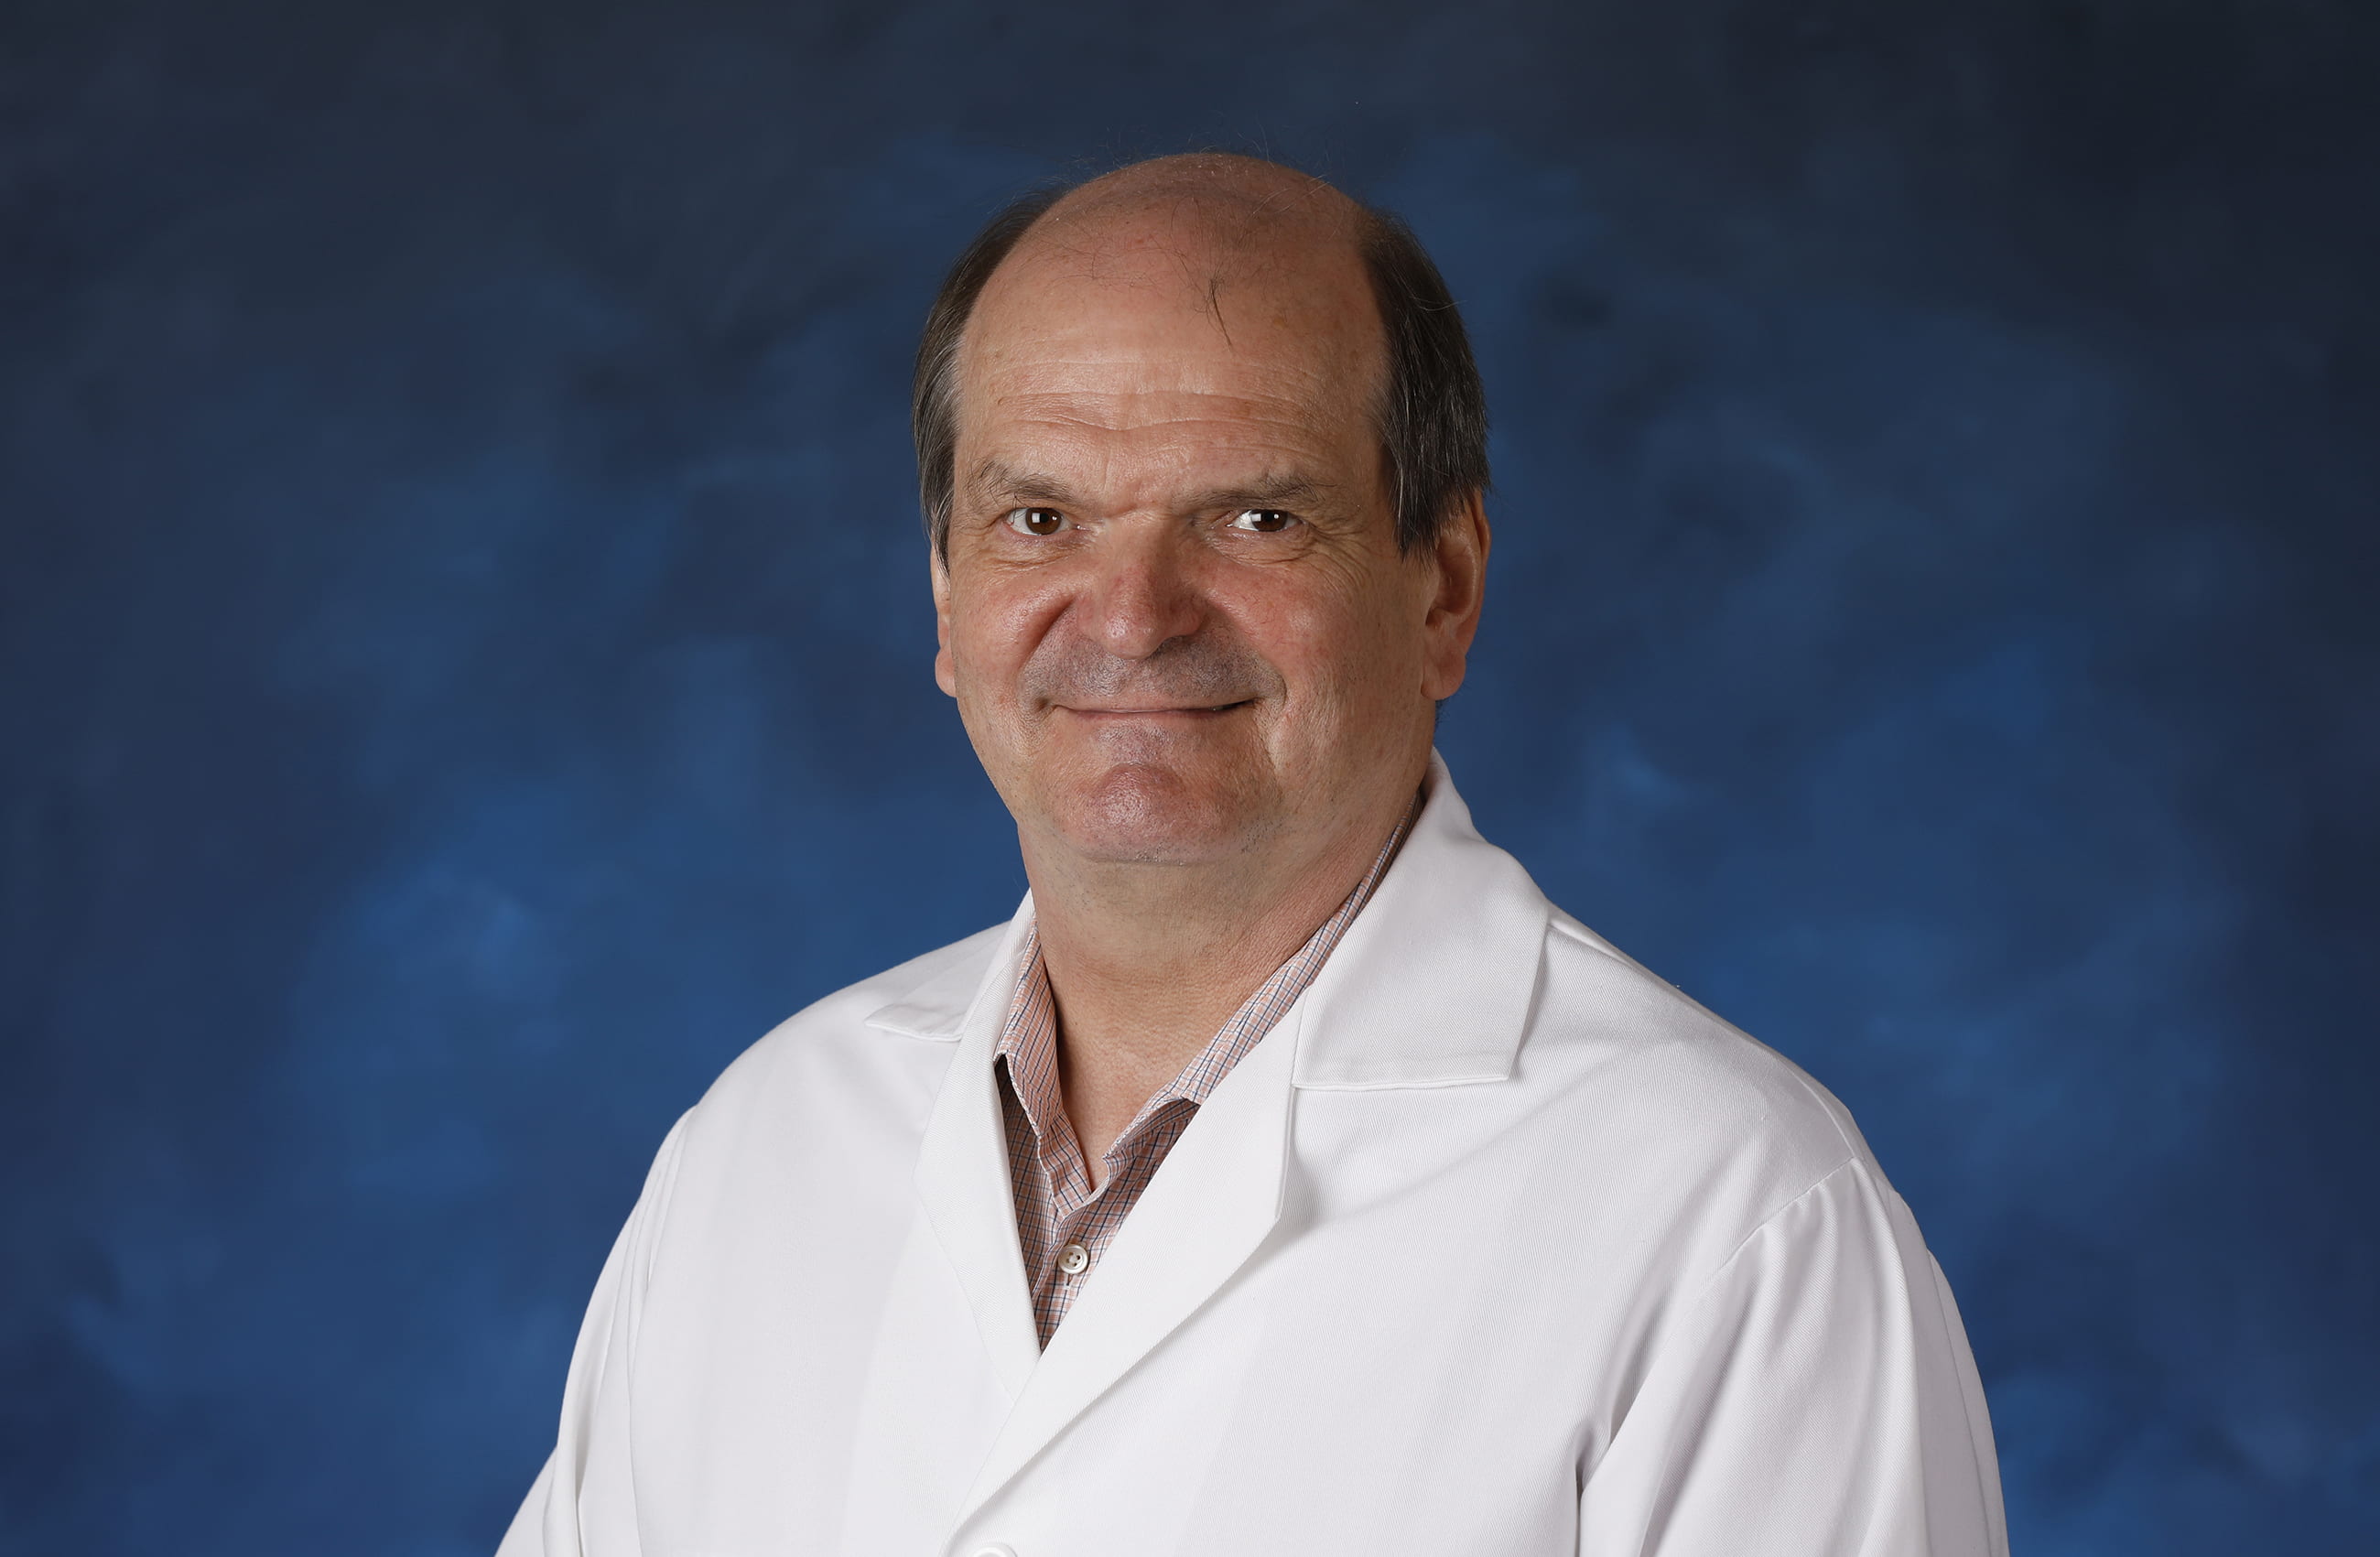 Krzysztof Palczewski, PhD, the Irving H. Leopold chair and a distinguished professor in the Gavin Herbert Eye Institute, Department of Ophthalmology at the UCI School of Medicine